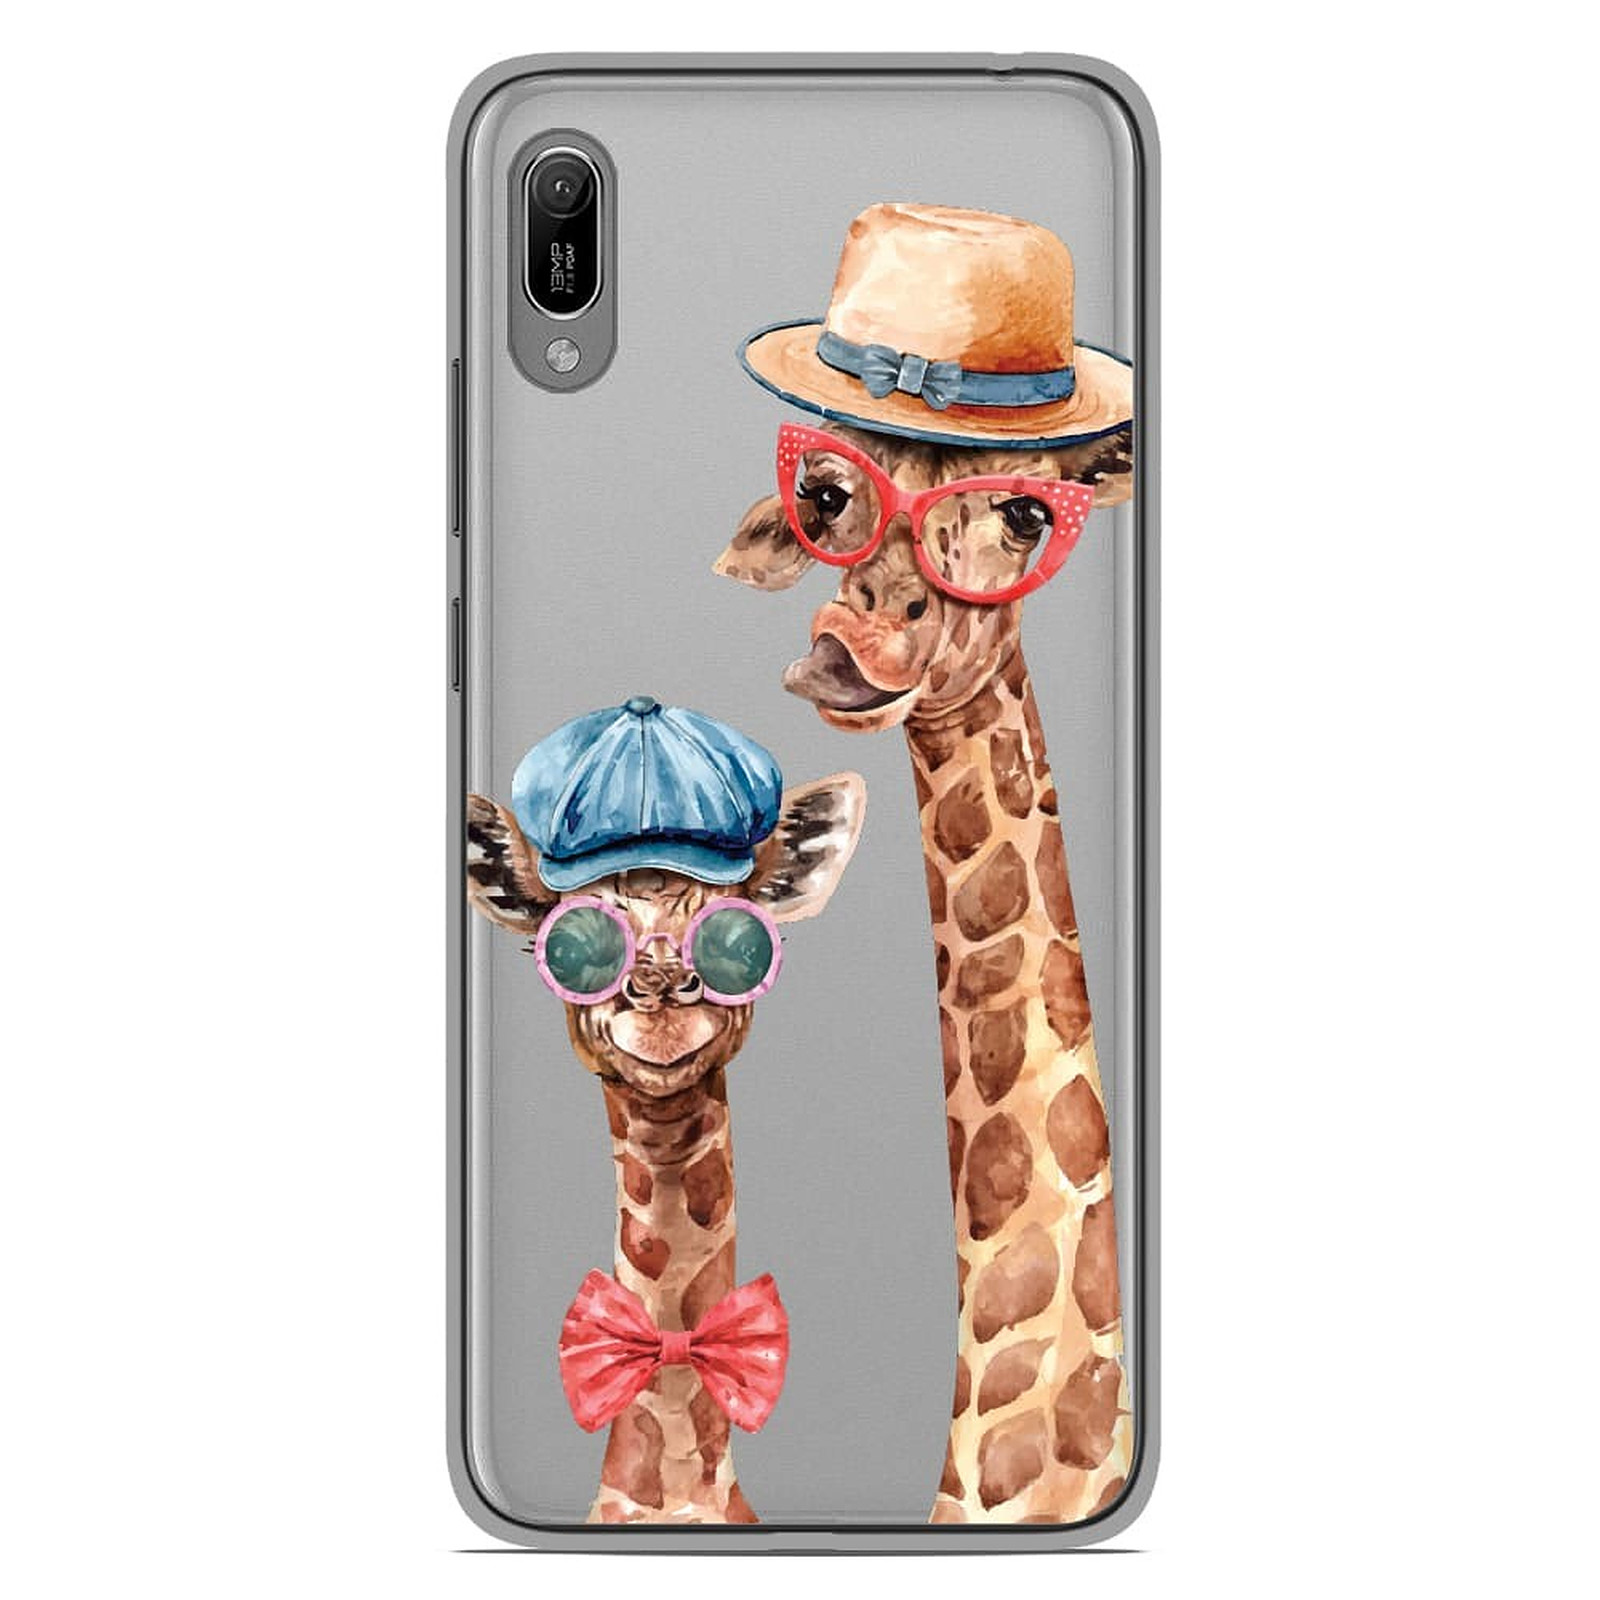 1001 Coques Coque silicone gel Huawei Y6 2019 motif Funny Girafe - Coque telephone 1001Coques